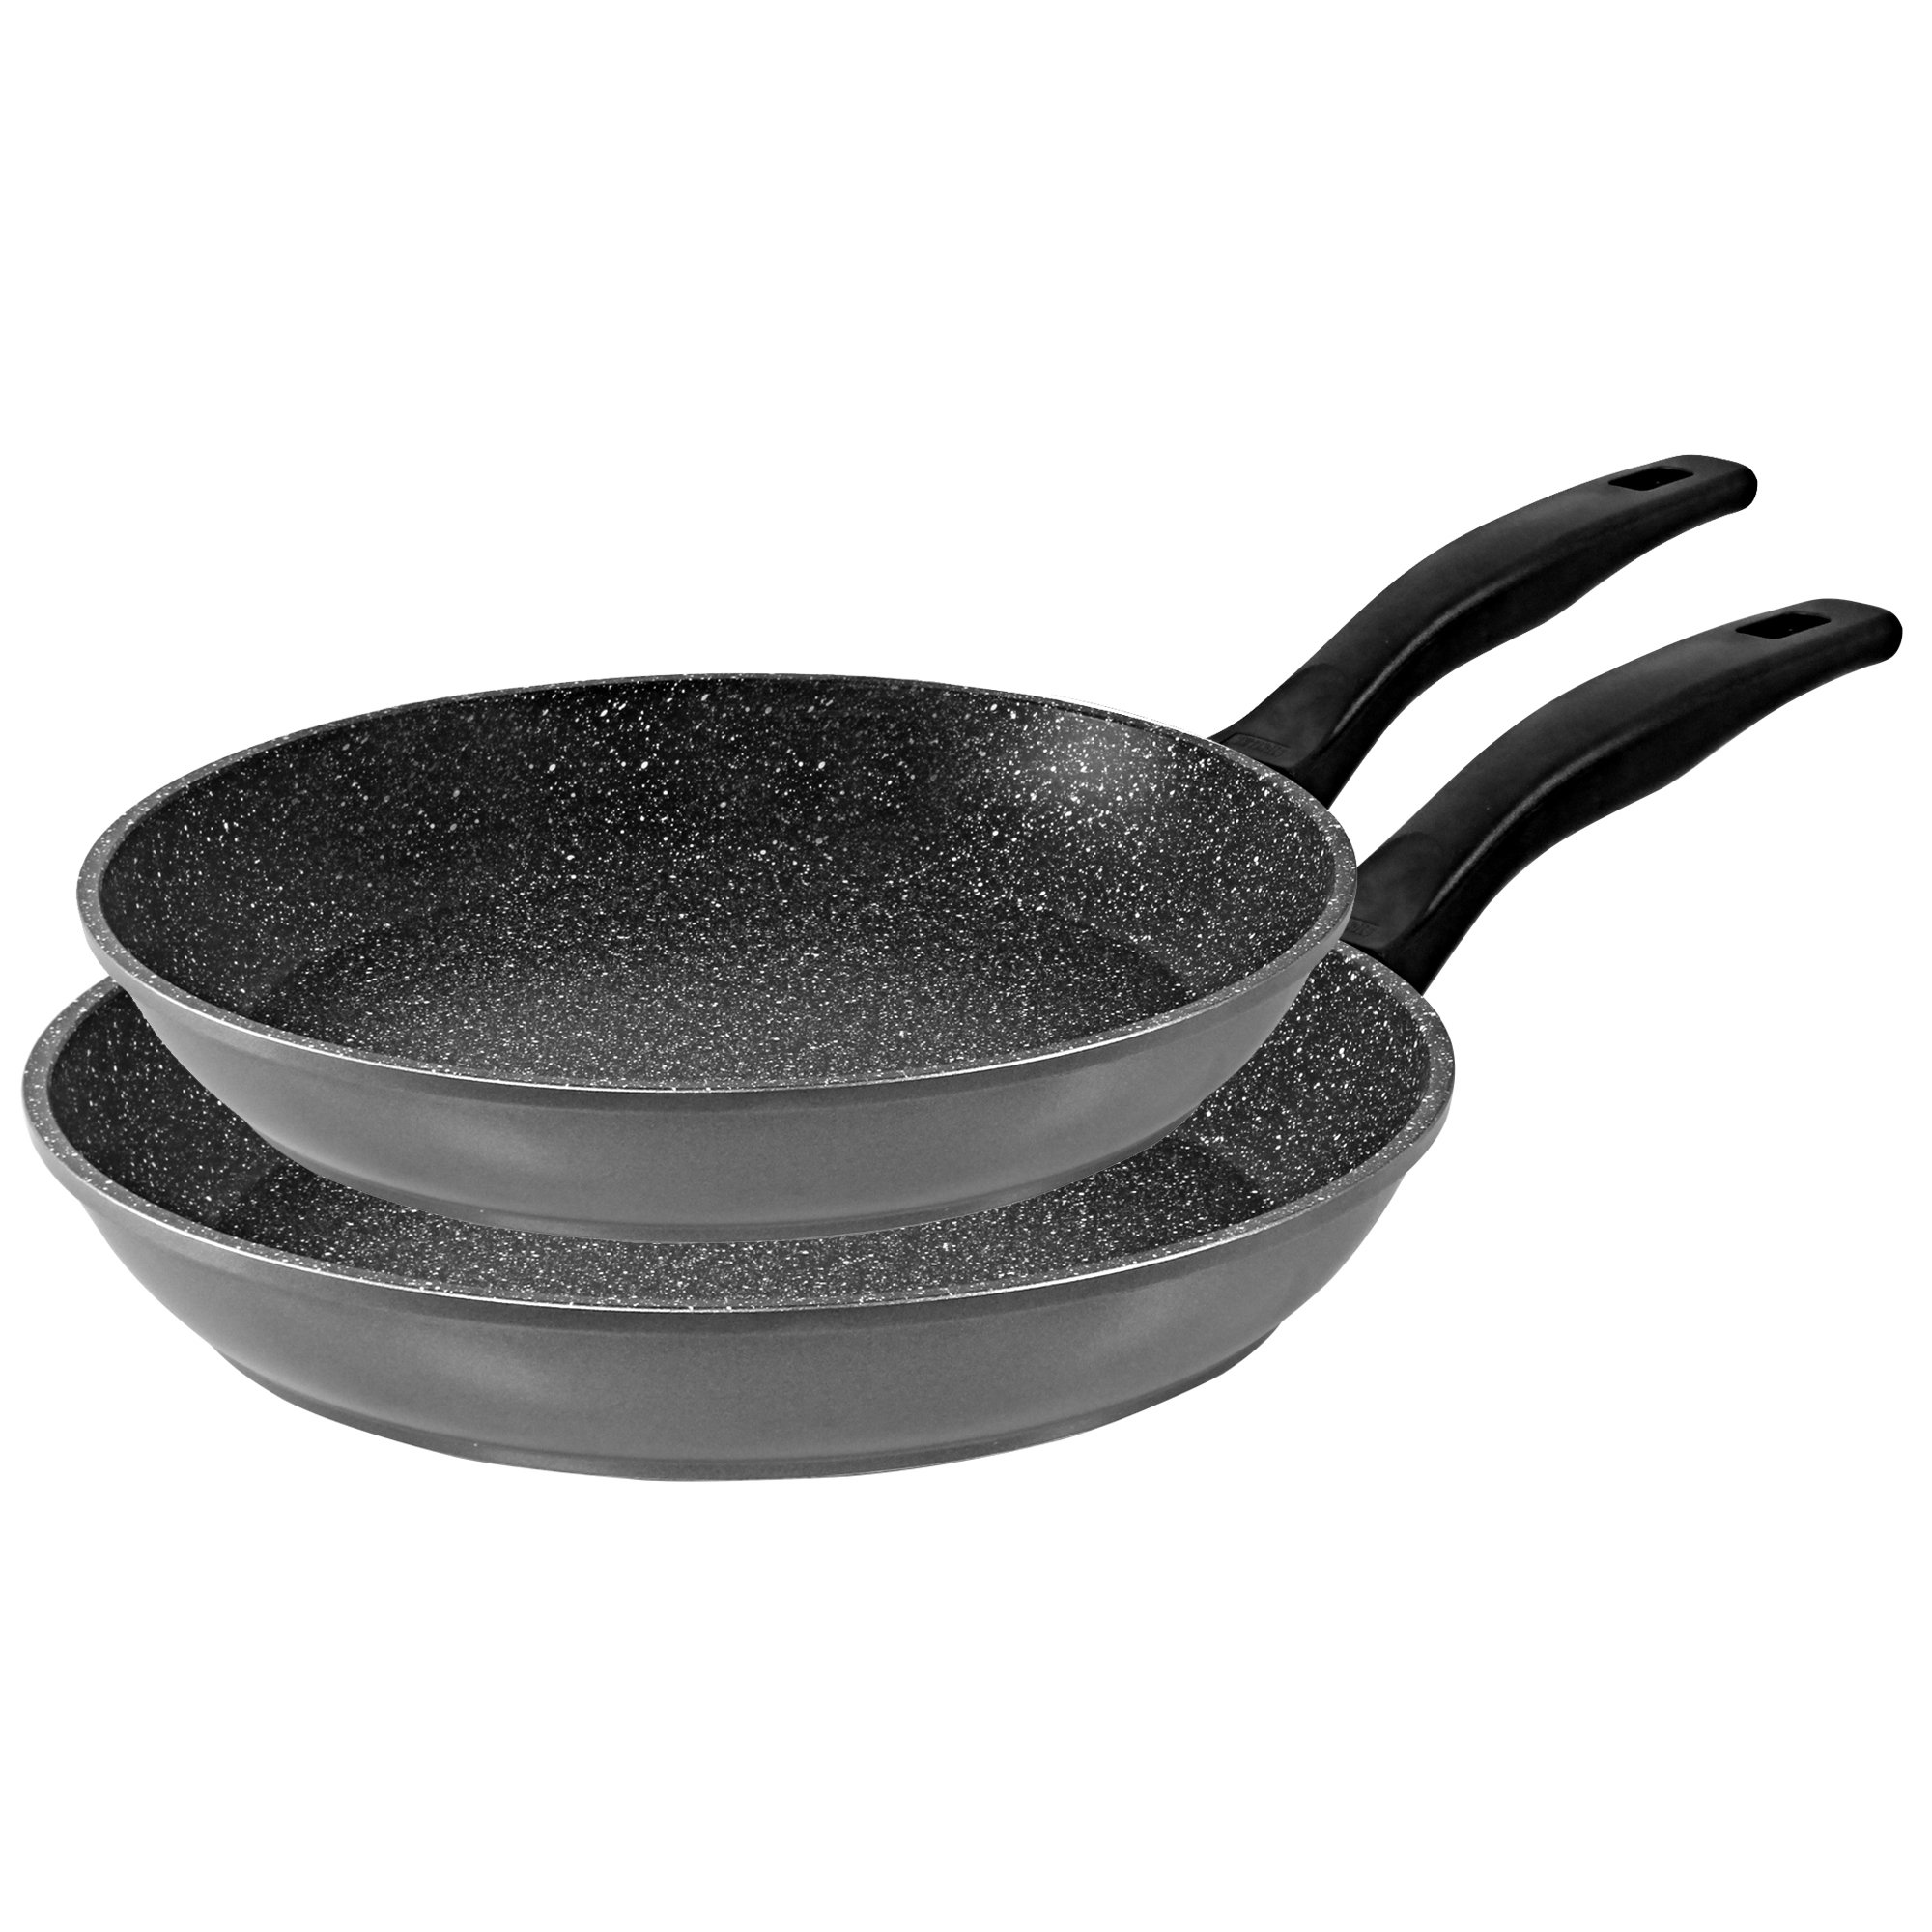 STONELINE® pan set, 2 pieces, 20/28 cm, non-stick coating, induction and oven-safe